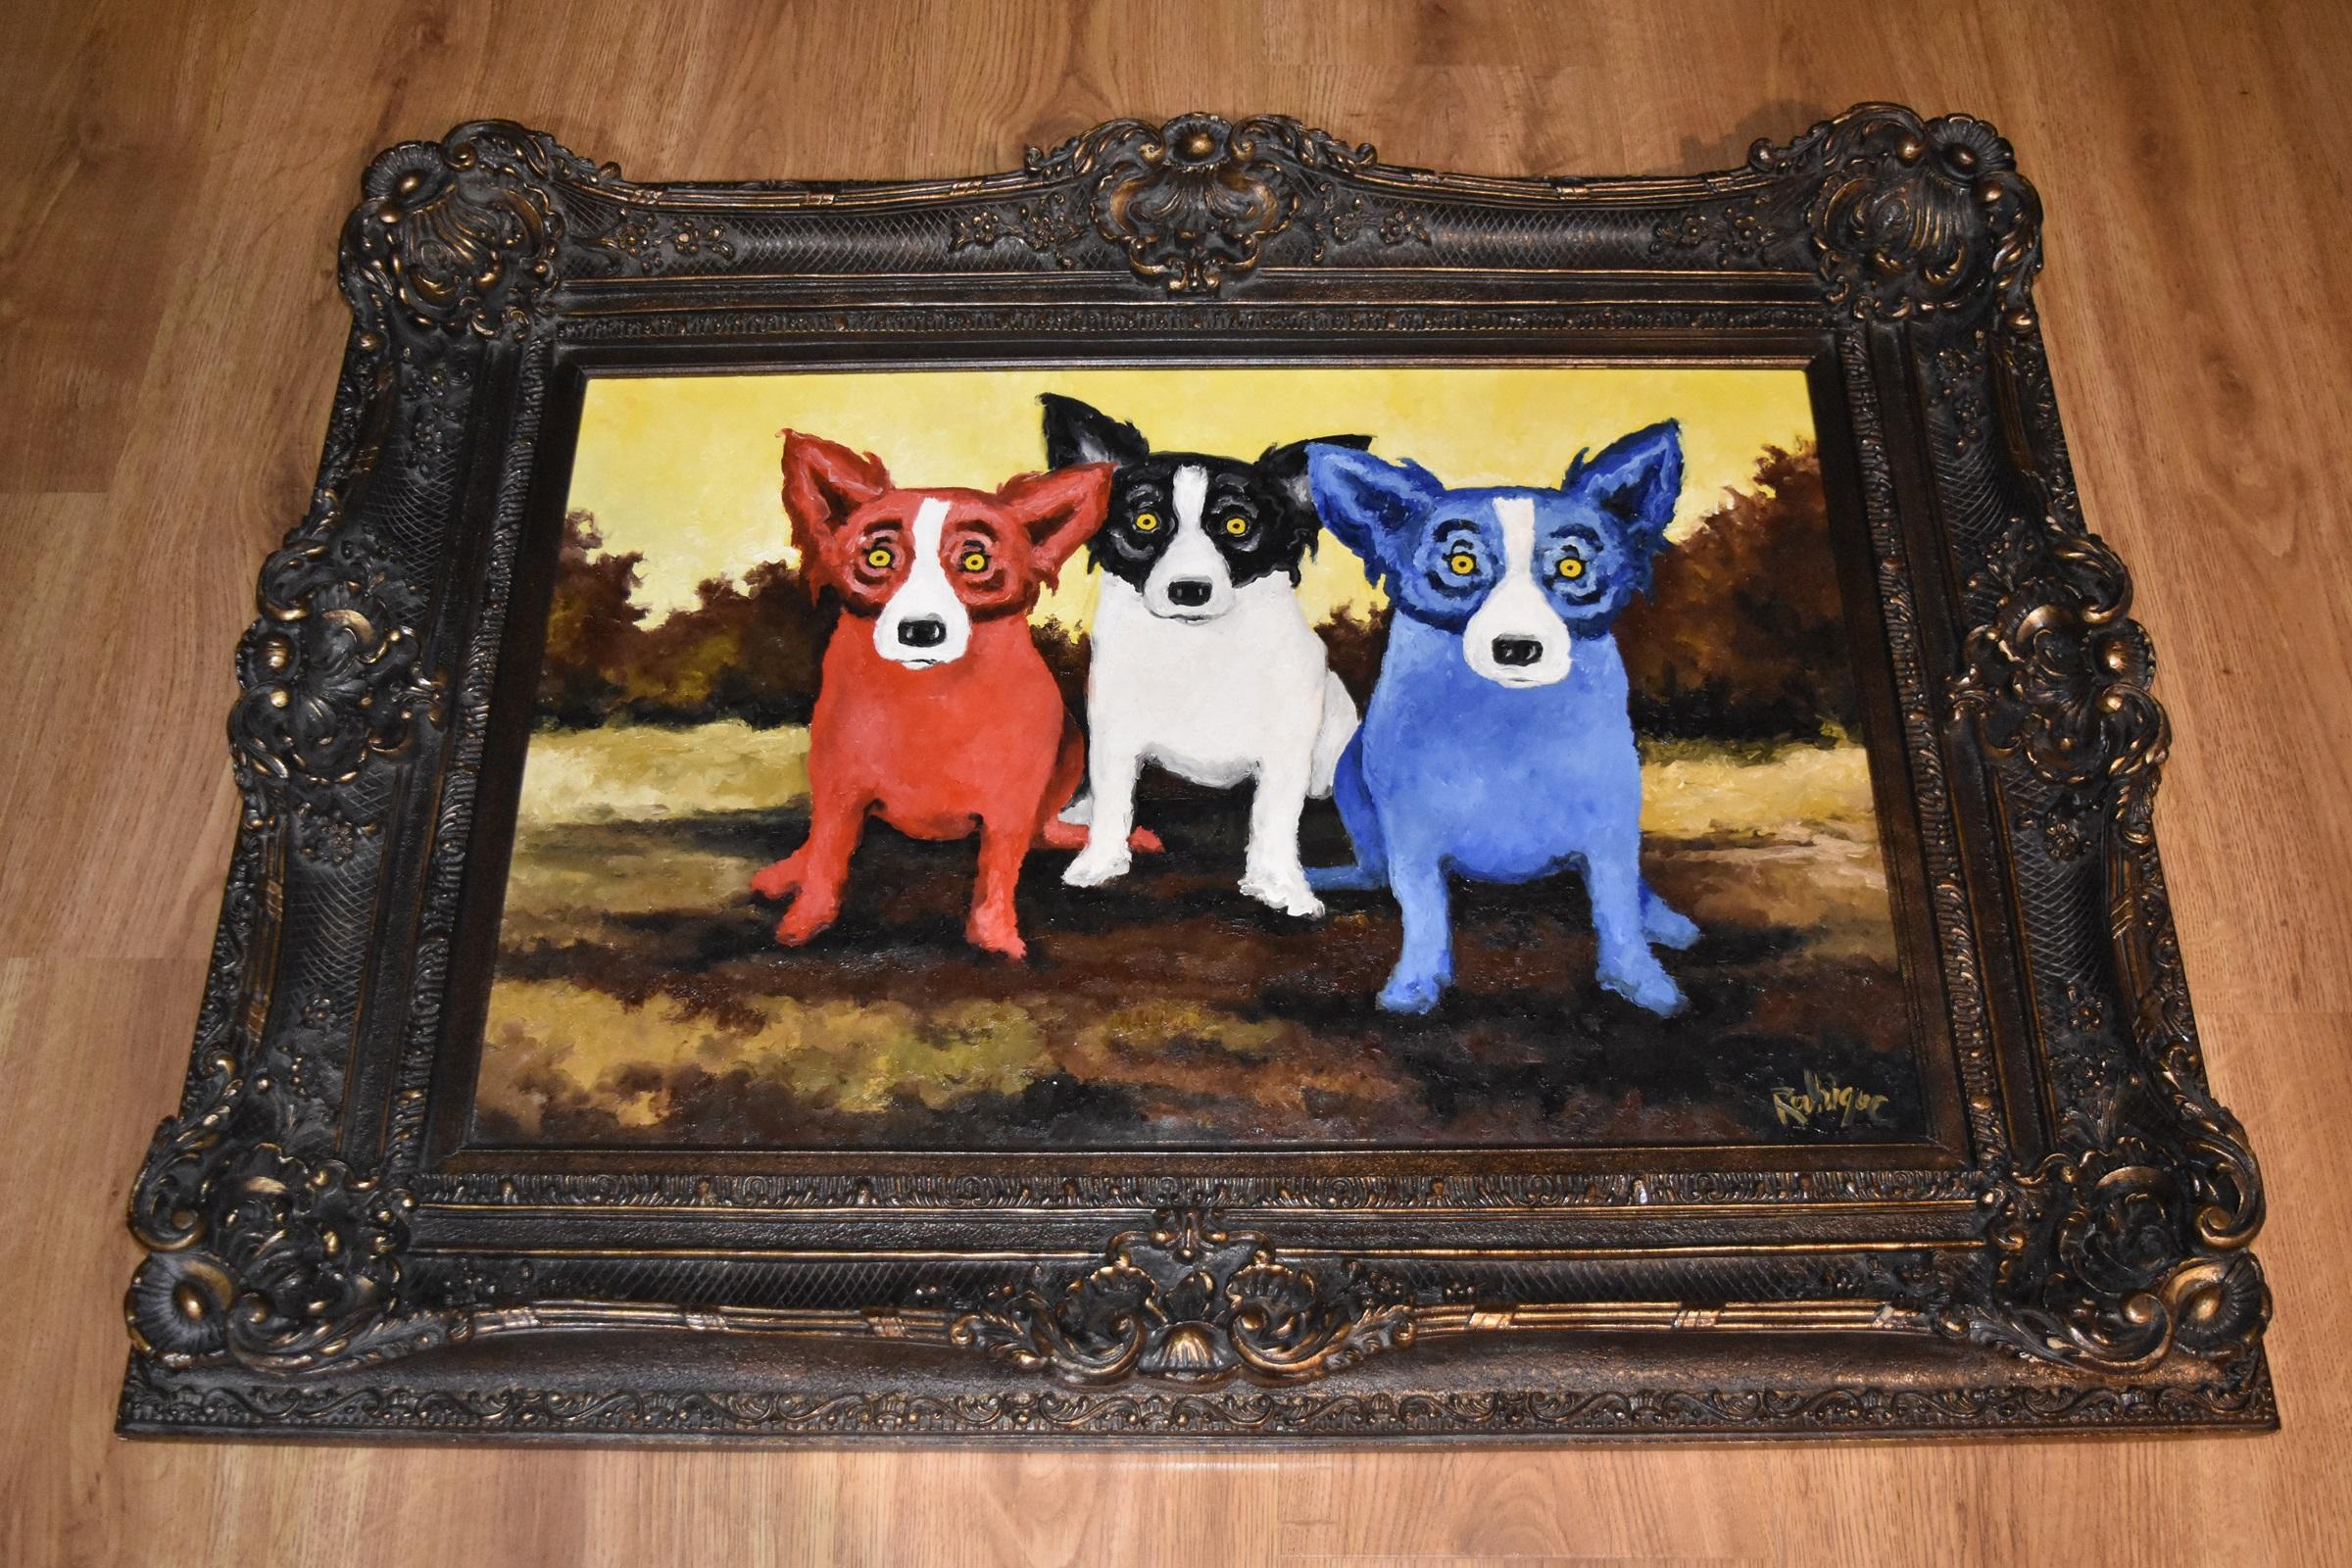 Original - Split Personality - Signed Oil on Canvas Blue Dog - Painting by George Rodrigue